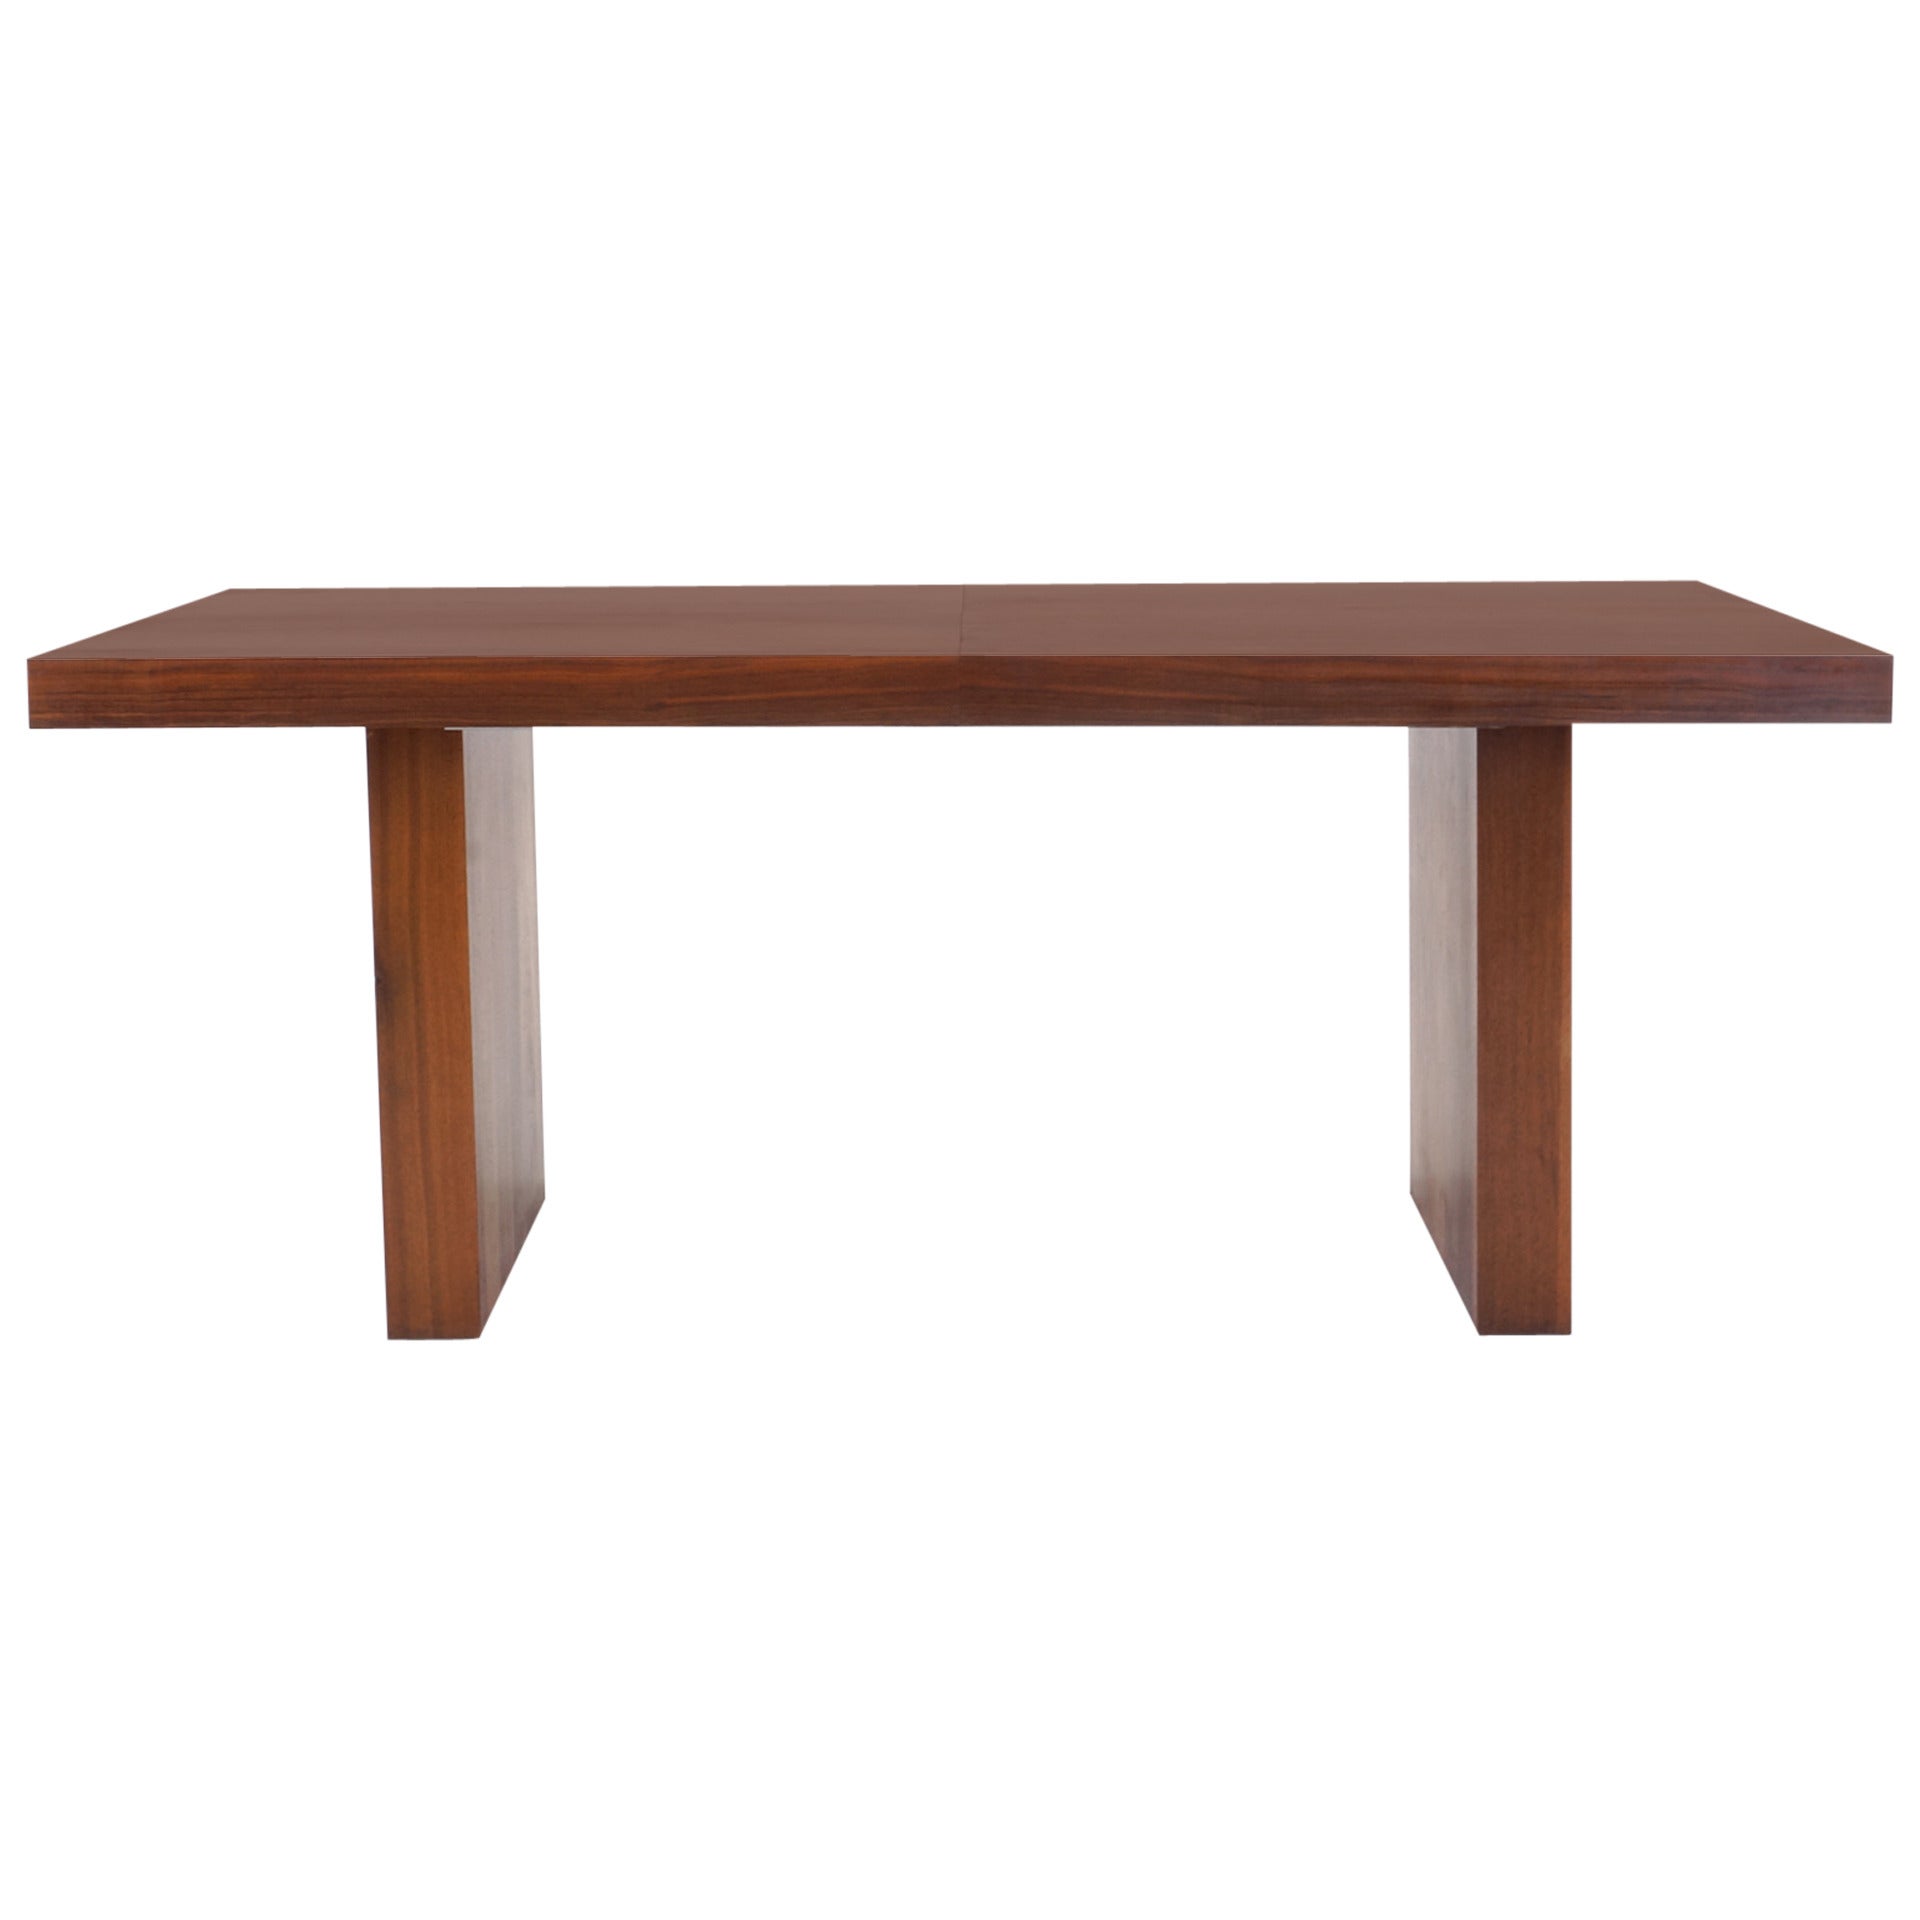 Milo Baughman Dining Table. Extends to 9 feet.